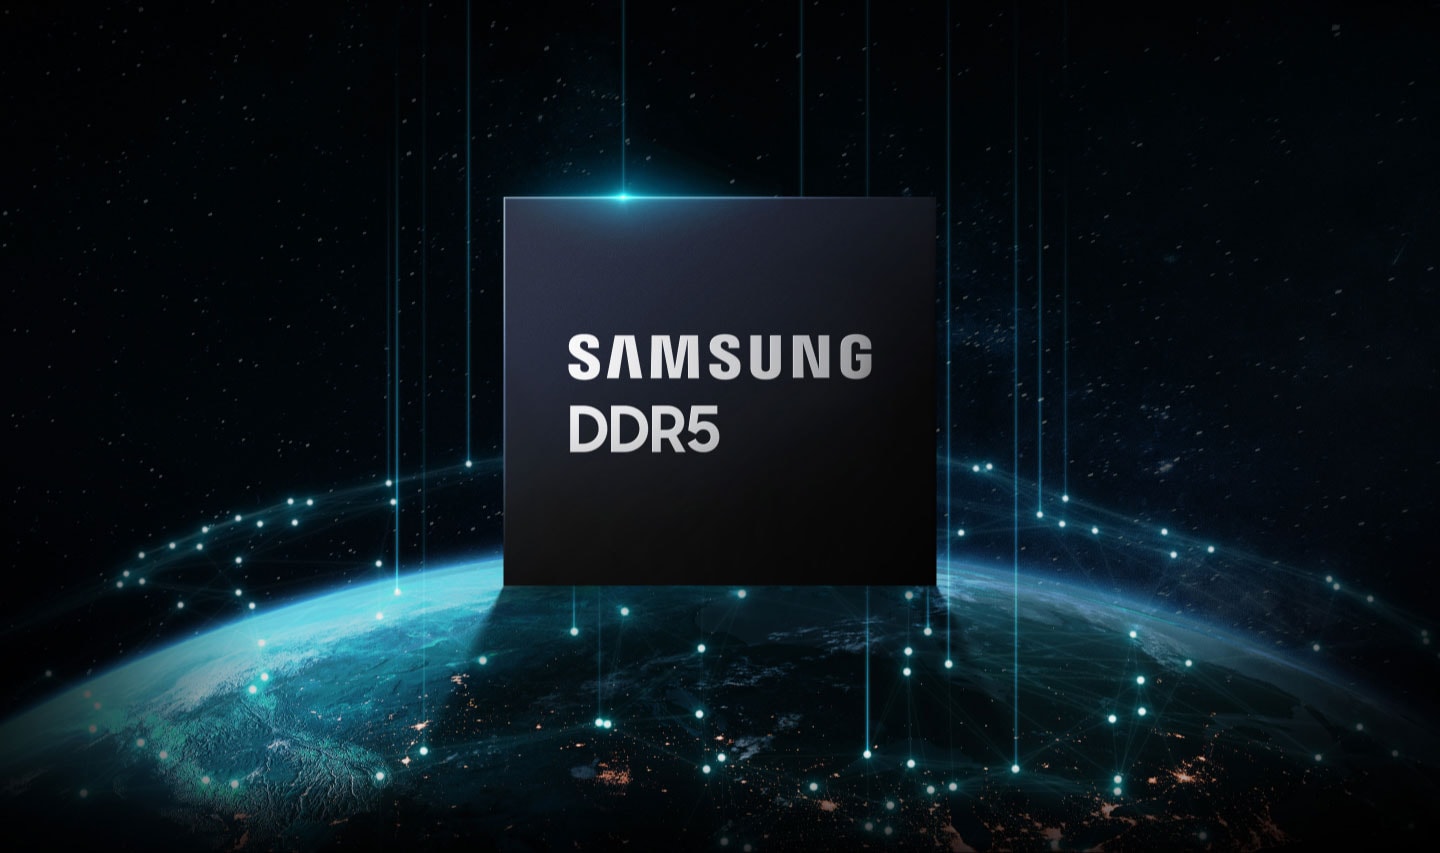 An illustrative image of Samsung DDR5 chip above The Earth.